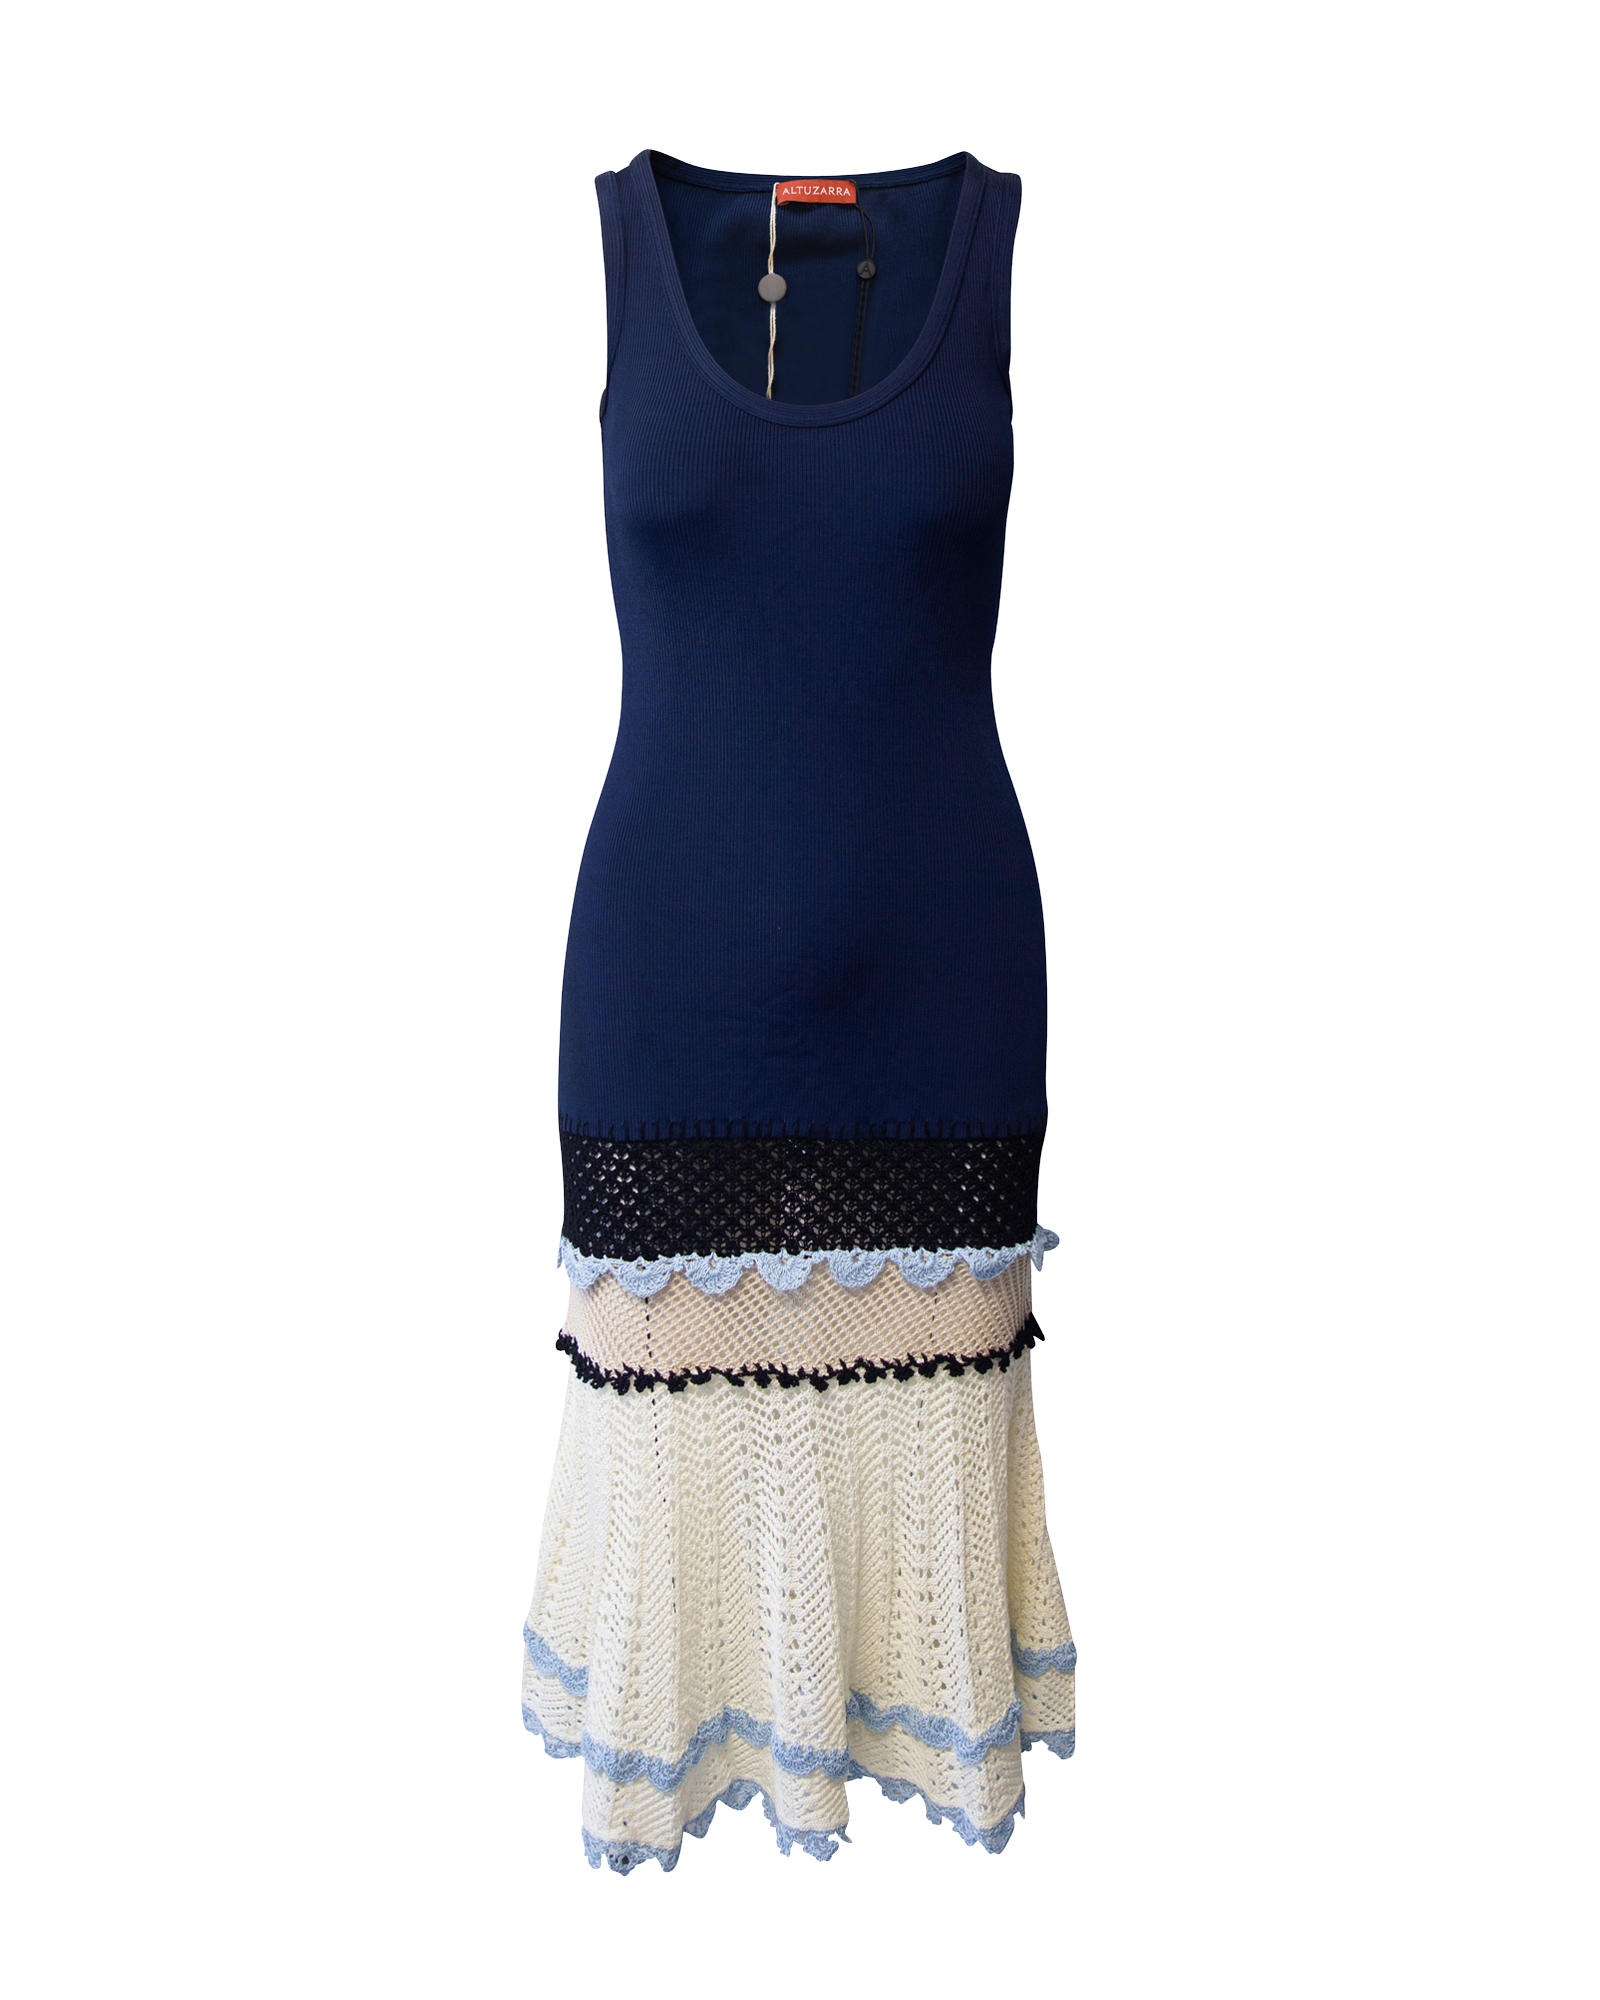 Knitted Dress with Crochet Flared Hem in Navy Blue Cotton